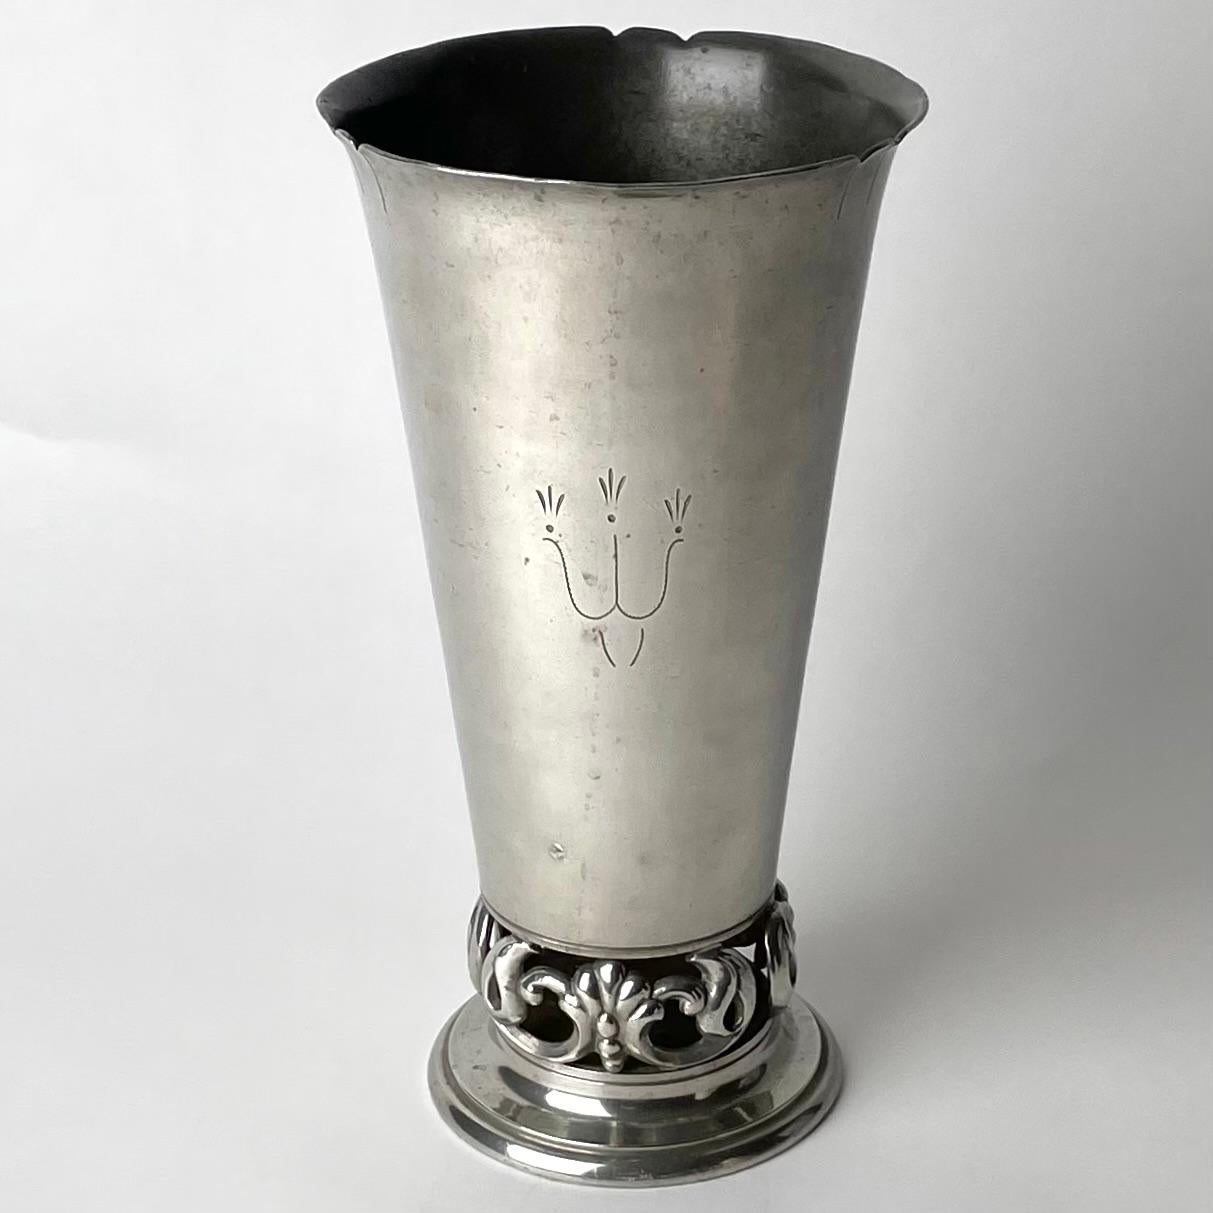 Sophisticated pewter vase in Swedish Grace. Made by J.L. Hultman in Stockholm, Sweden and dated 1932. The vase is simply and elegantly decorated on one side with an openwork decoration at the base.

Wear consistent with age and use